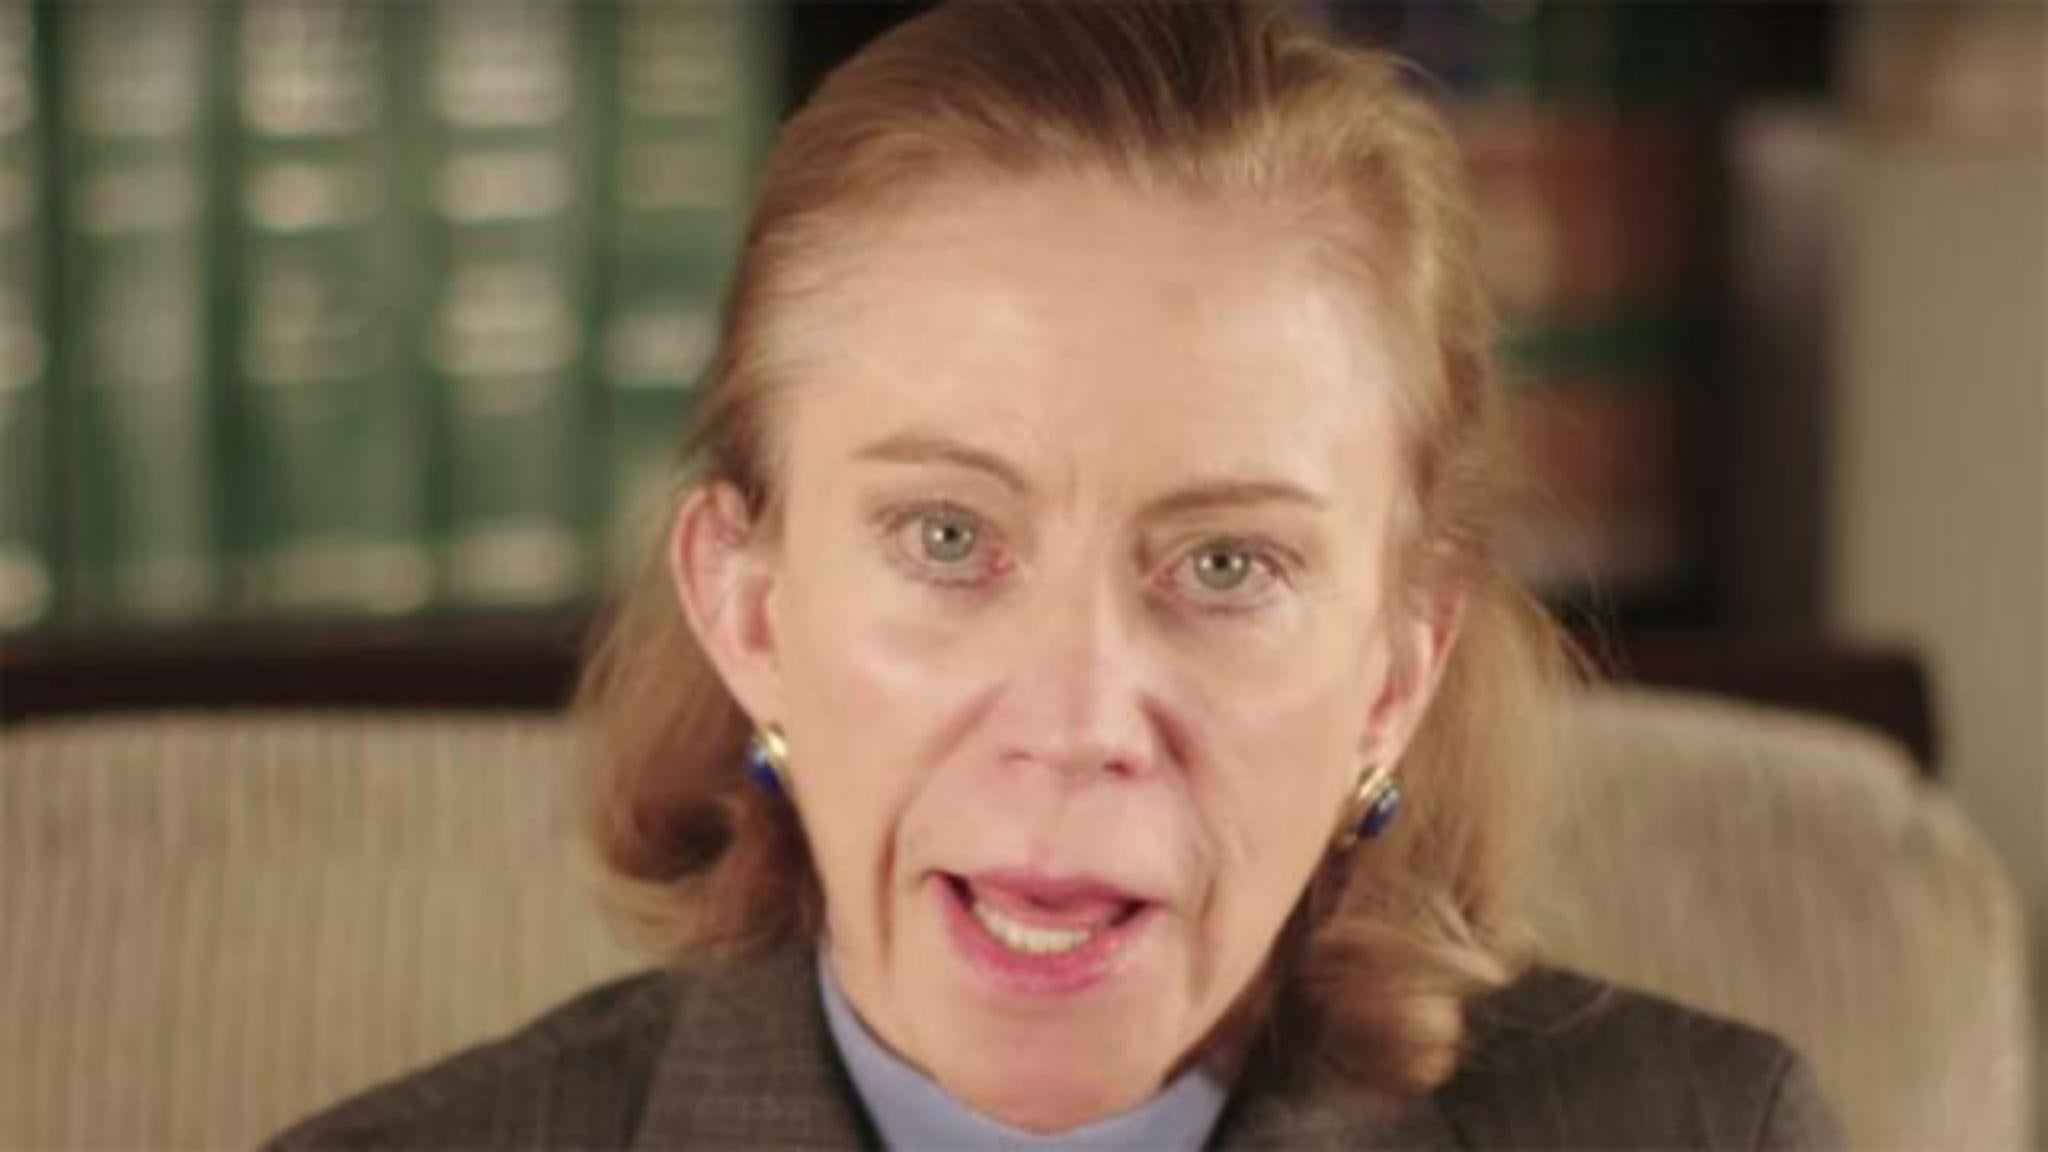 President Donald Trump has withdrawn his nomination of Kathleen Hartnett White, a controversial pick for a top environmental post.